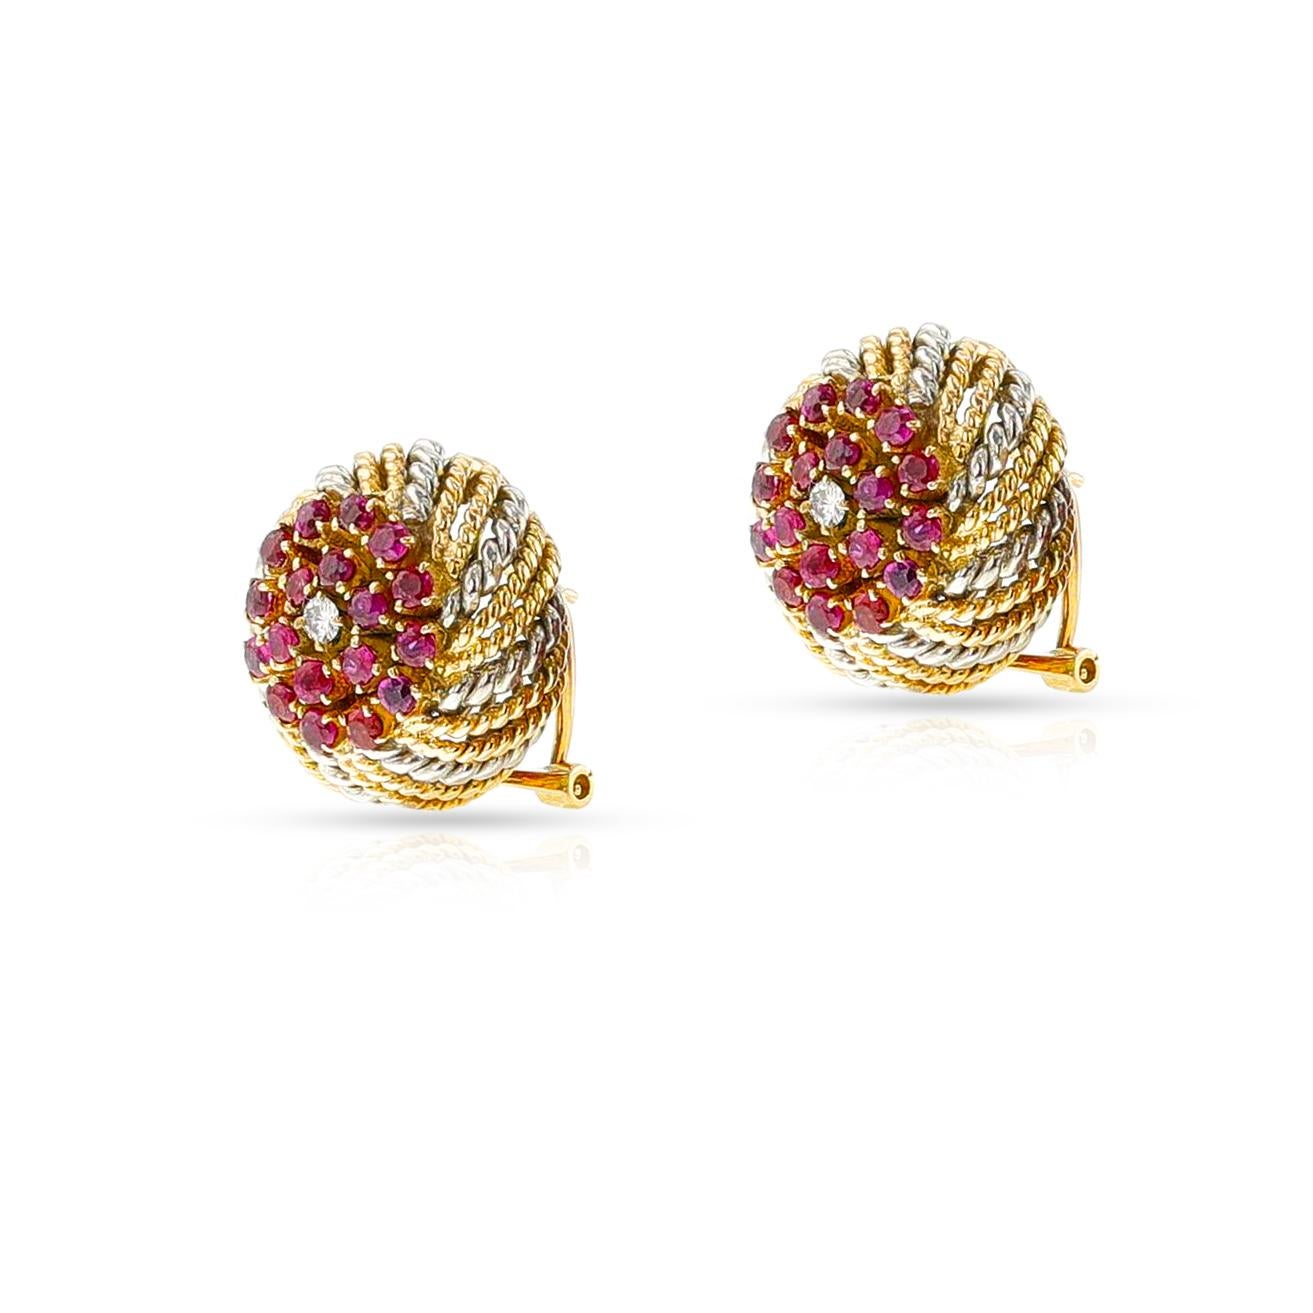 Round Cut Rope-Work Yellow and White Gold Ruby and Diamond Earrings, 14k For Sale